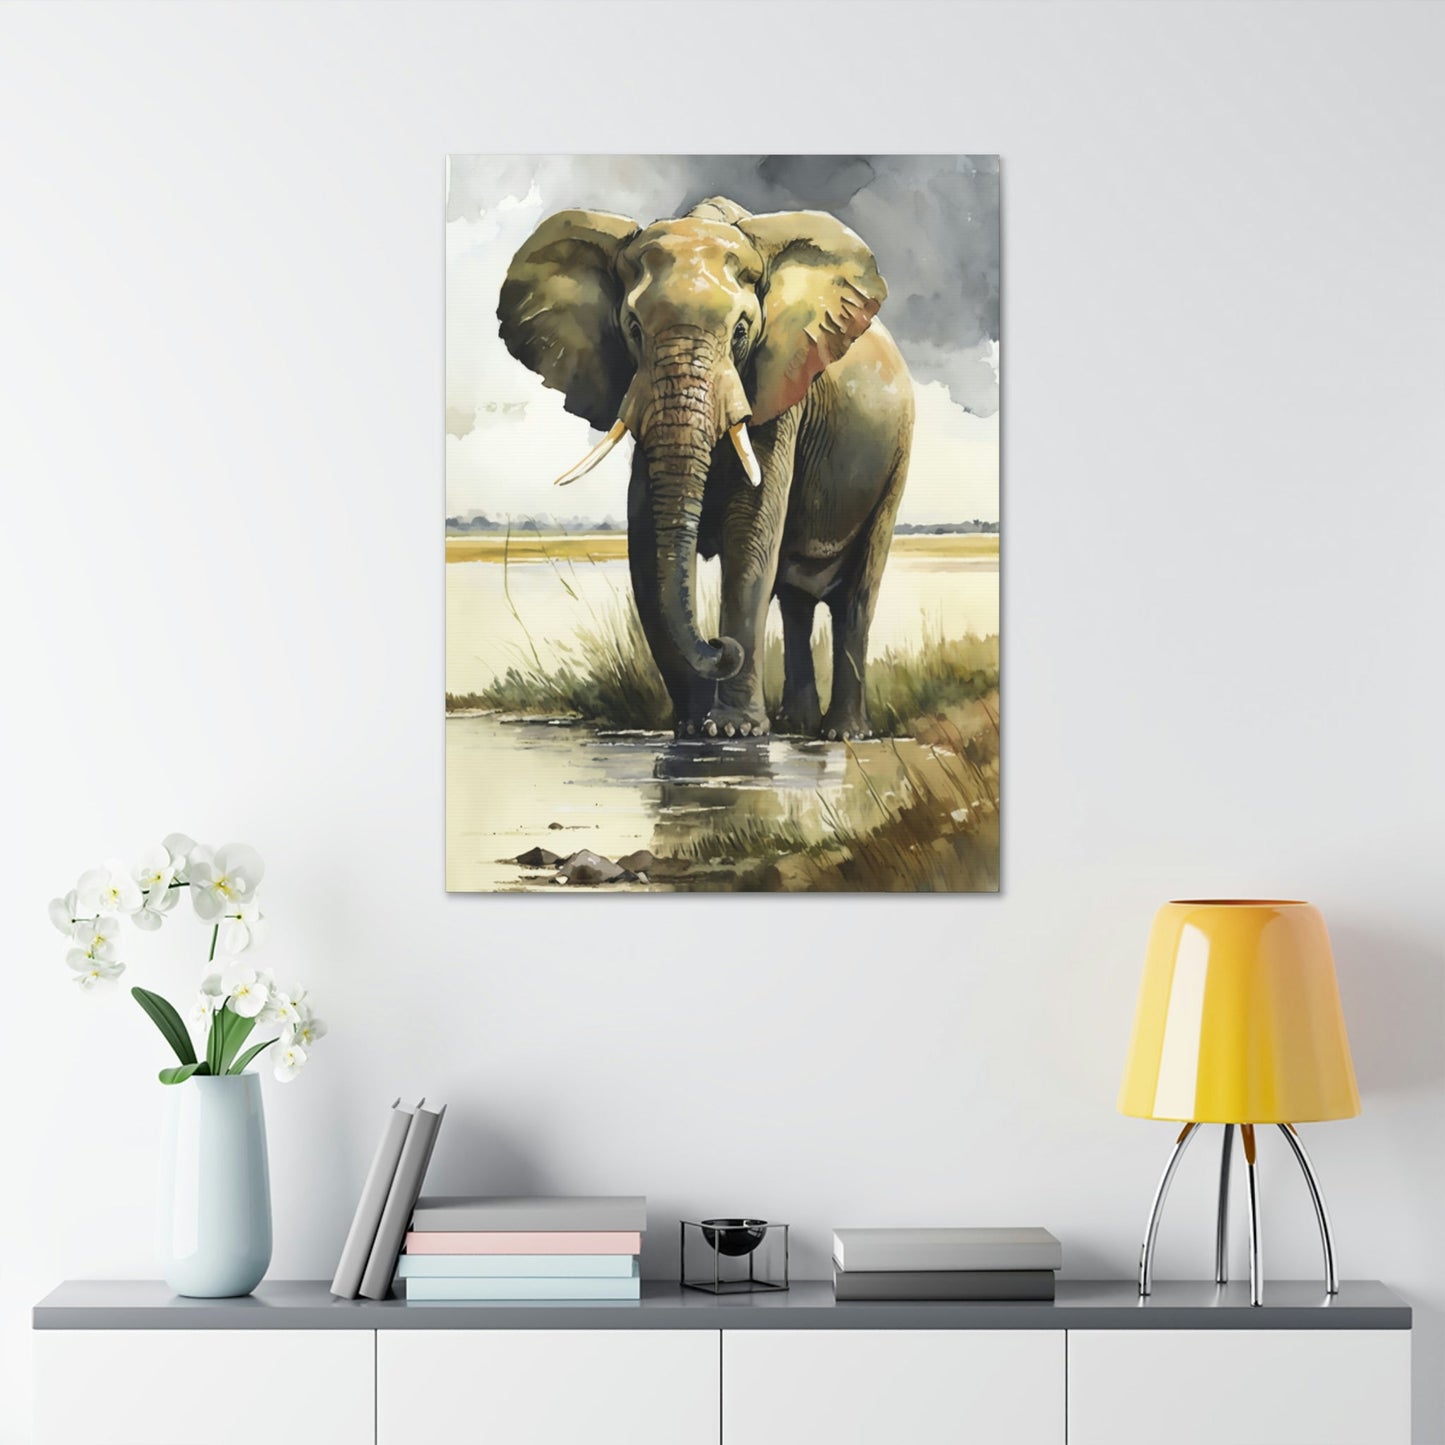 Serene Giants: Beautiful Art of Elephant in Calming Natural Landscapes